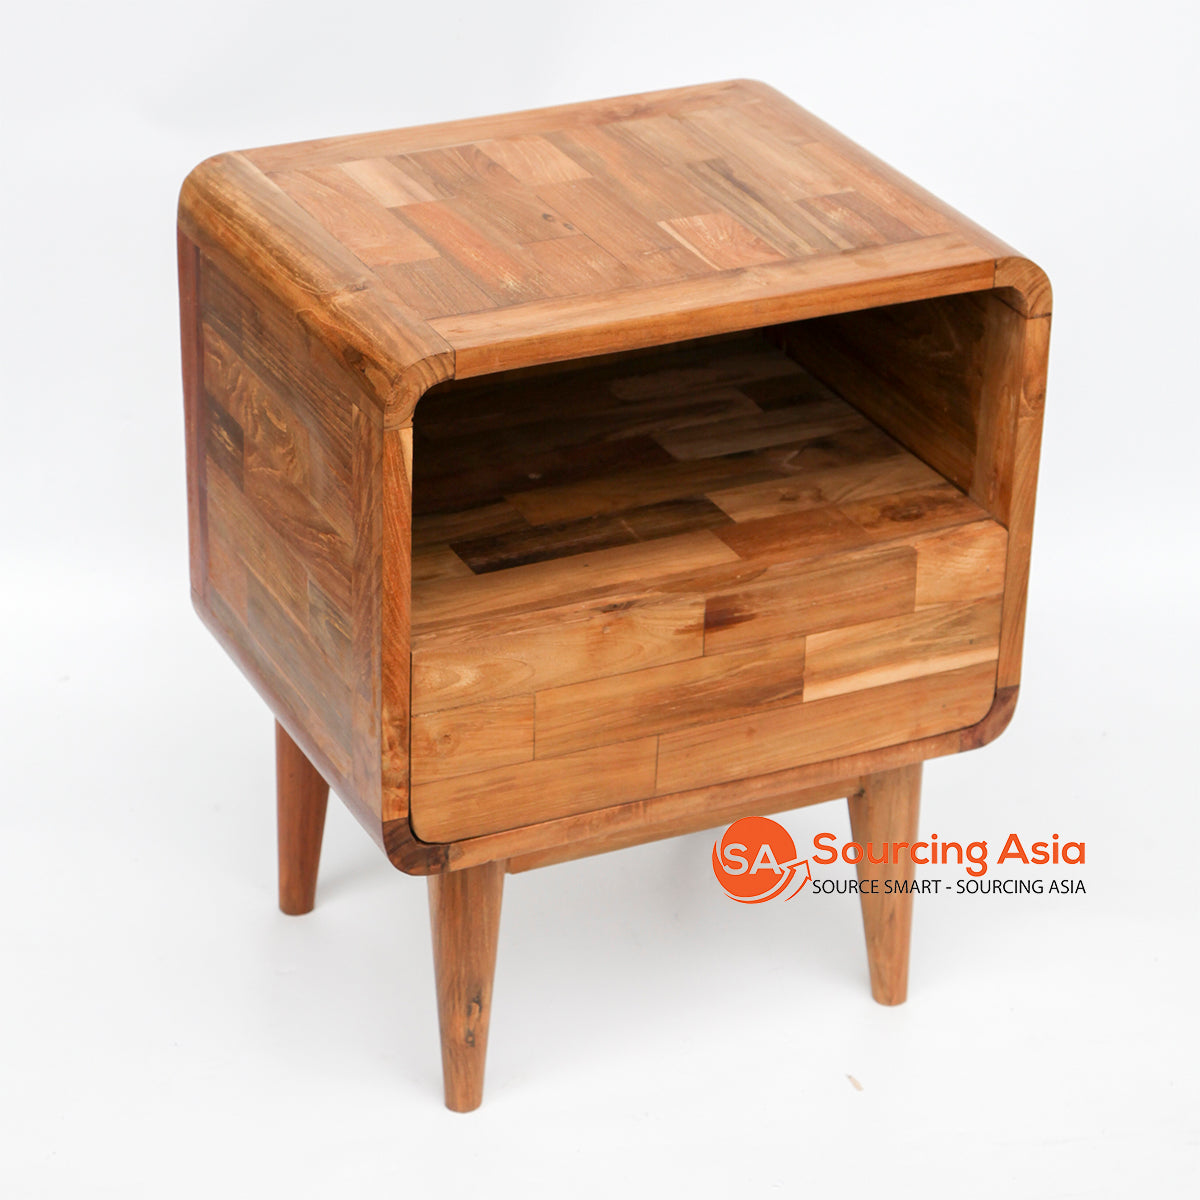 DLO003-3C SIDE TABLE WITH ONE DRAWER